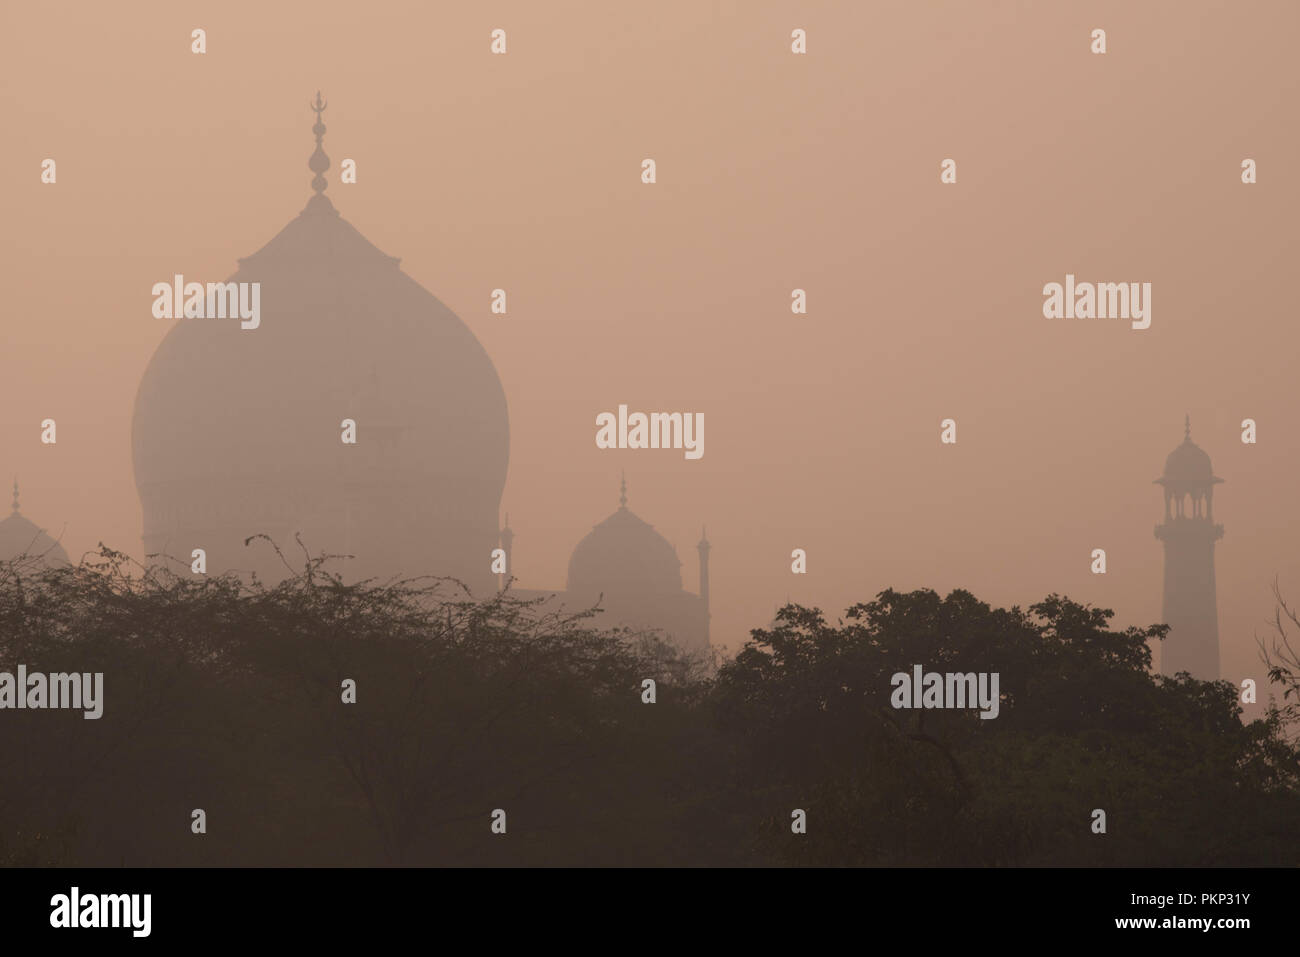 Romantic Taj Mahal the wonder of the world and the pride of India with its main dome & minaret in early morning winter warm light and haze  Agra India Stock Photo